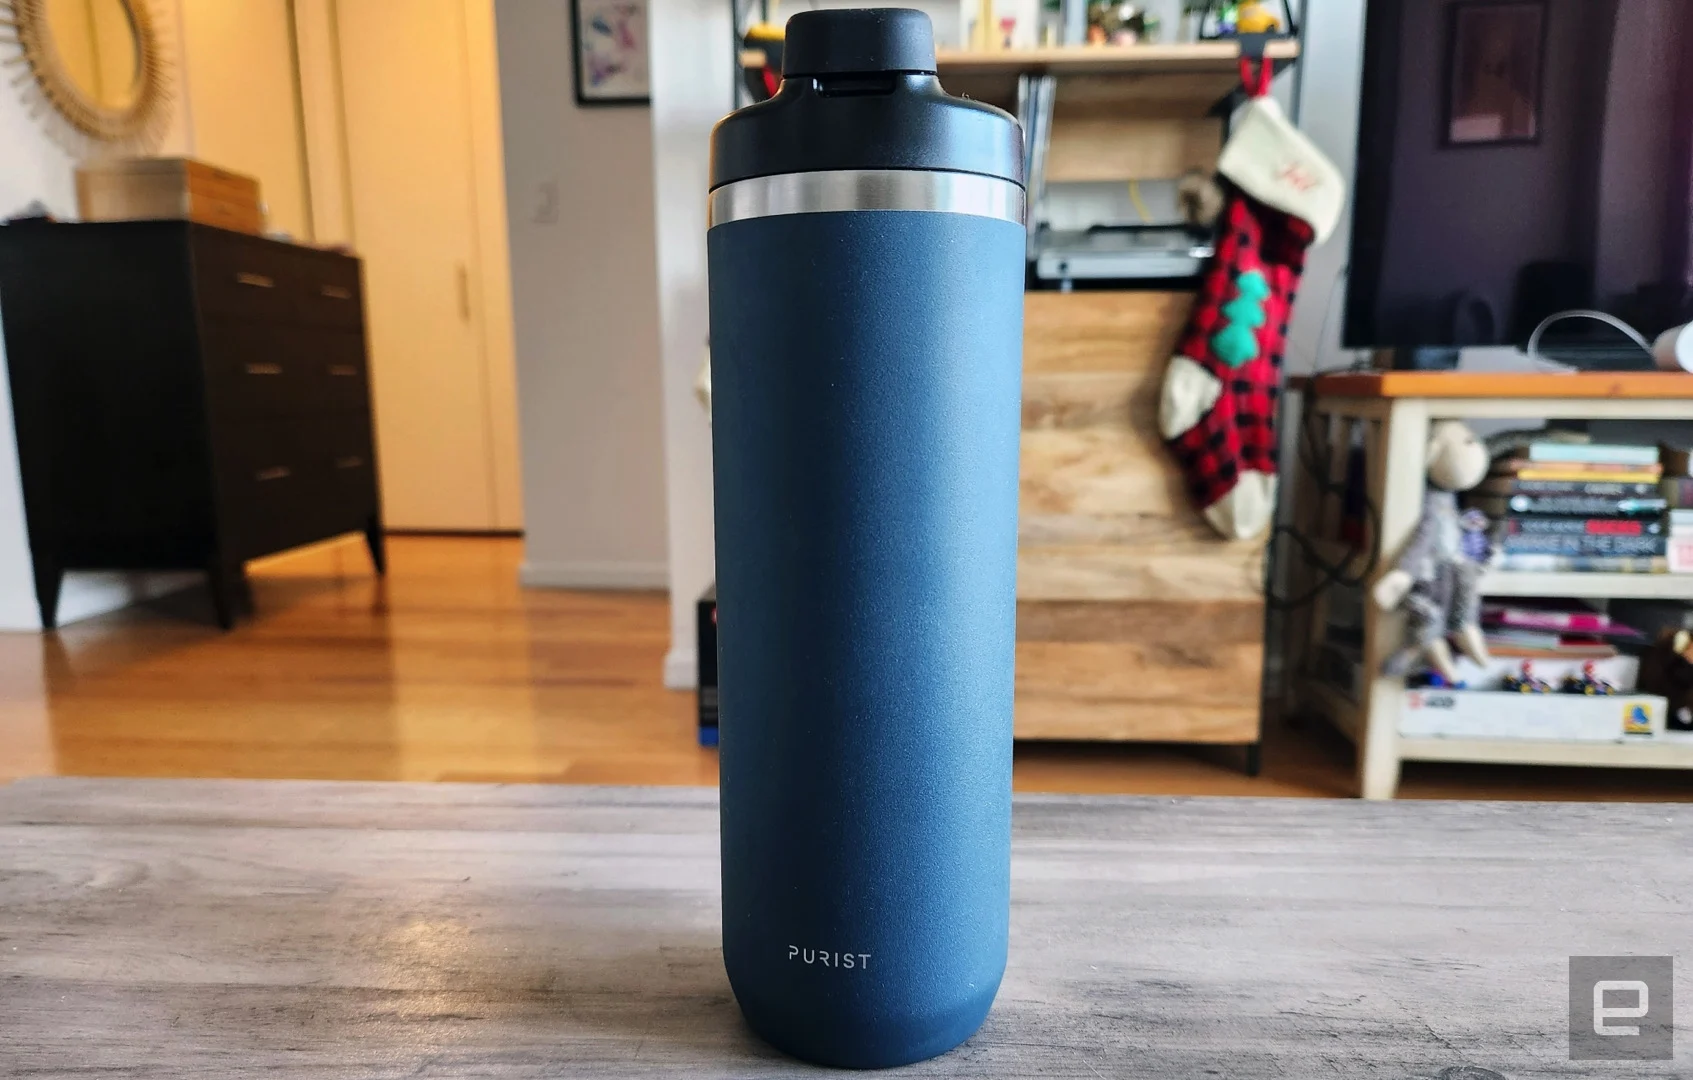 Purist Mover water bottle